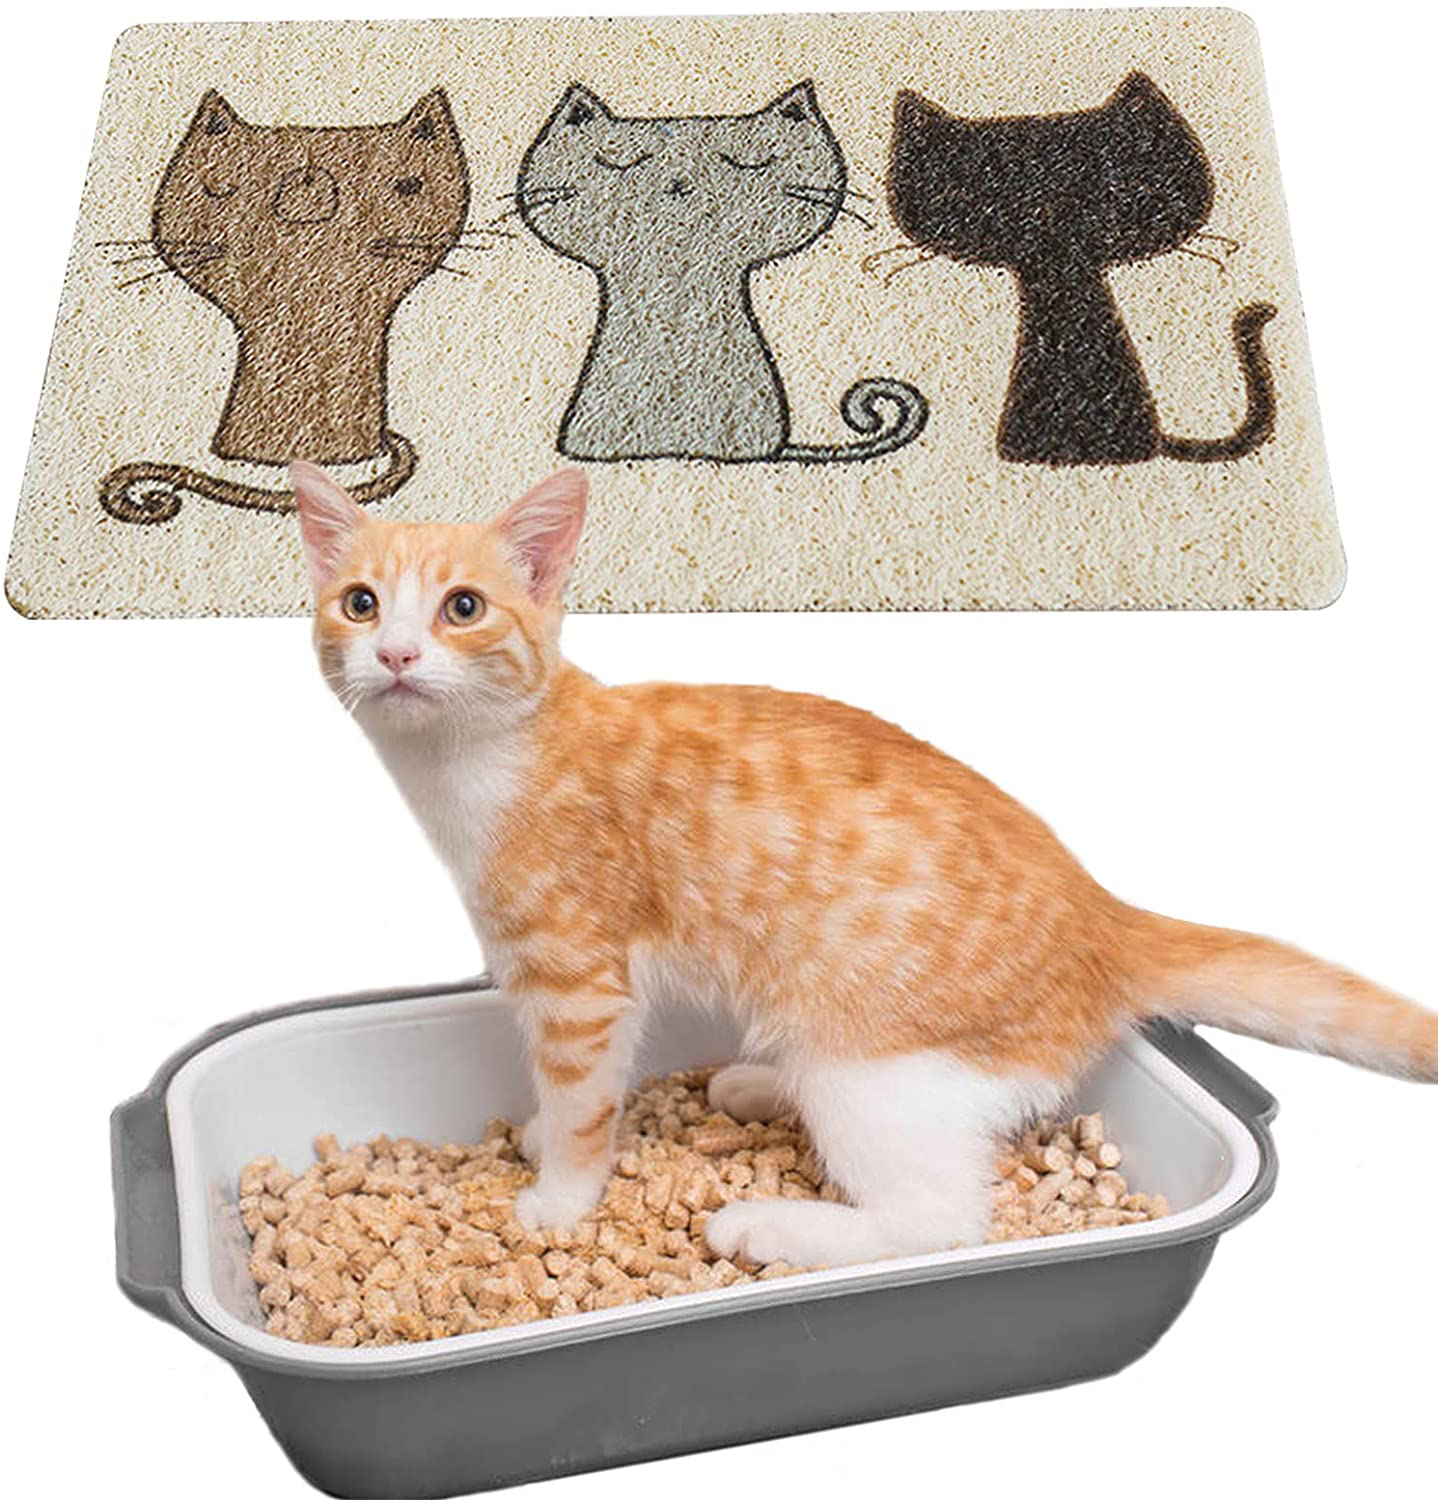 Cat Litter Mat, Cute Kitty Food Feeding Catching Placemat, Durable Pet Litter Rug for Cats, Dogs, Comfortable Kitten Litter Trapping Pad, under Litter Box Mat Soft on Paws, Easy Clean Scatter Control